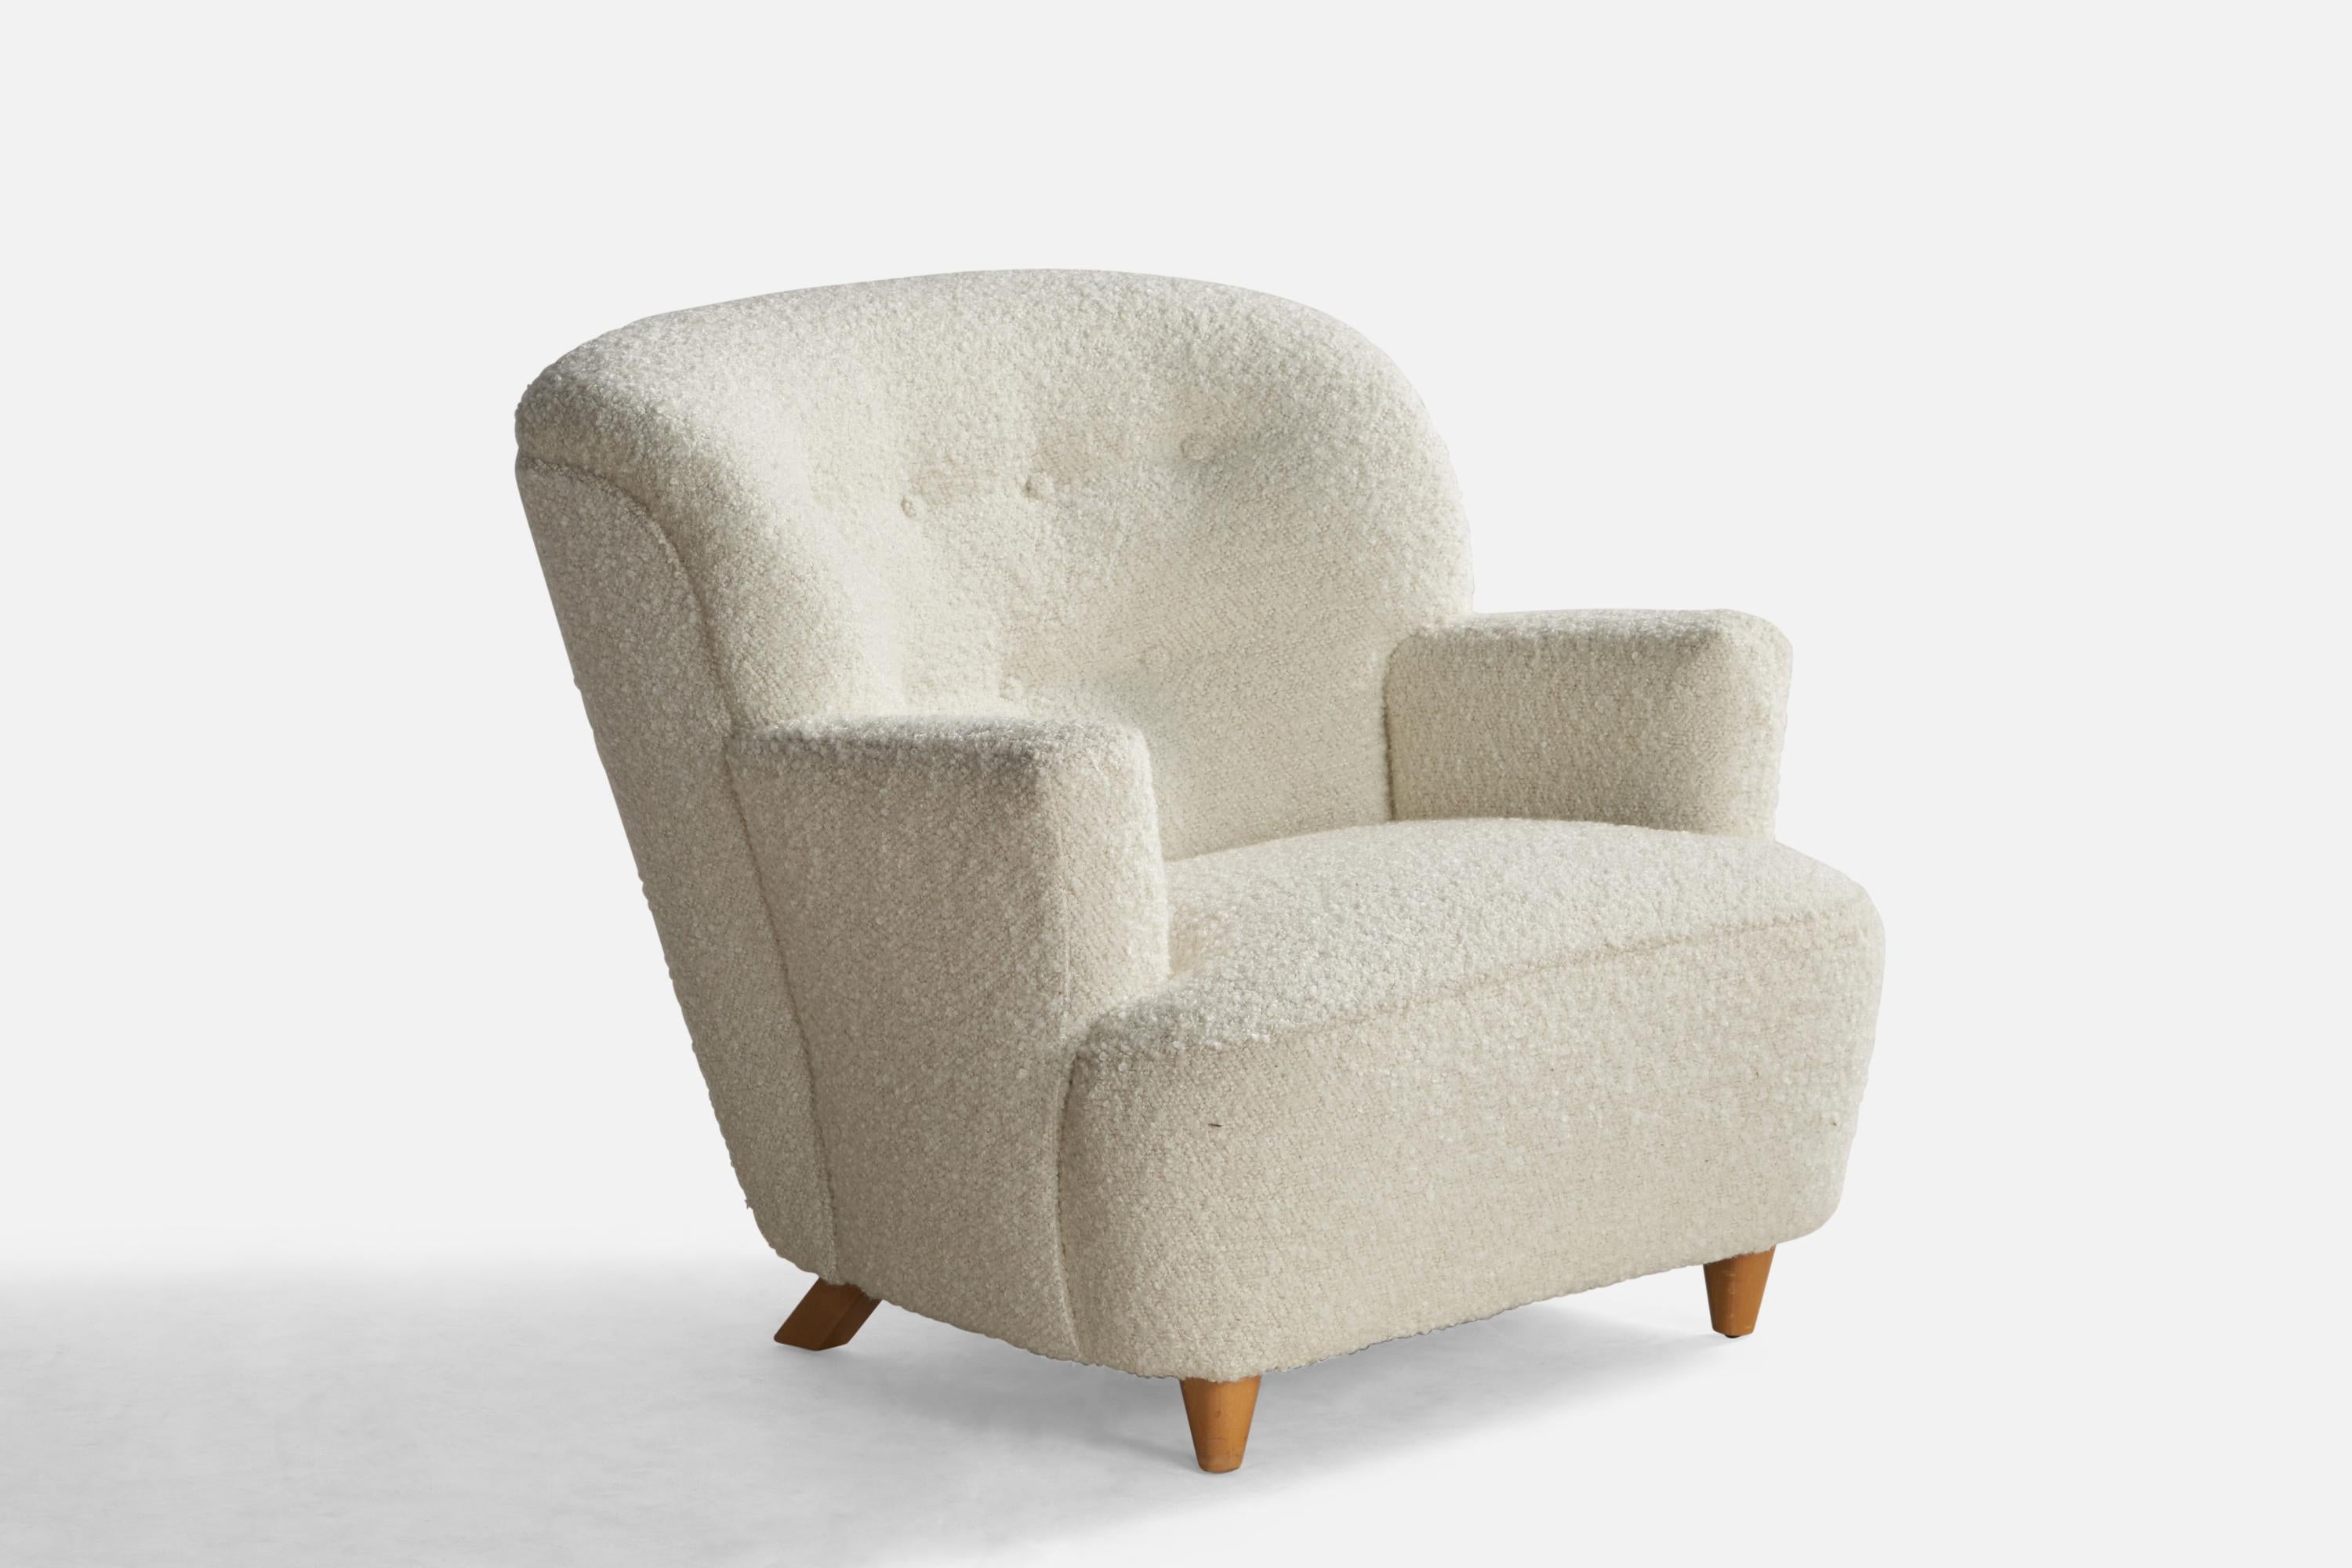 A wood and white bouclé fabric lounge chair attributed to Paul Laszlo, USA, 1940s.

Seat height: 13.75